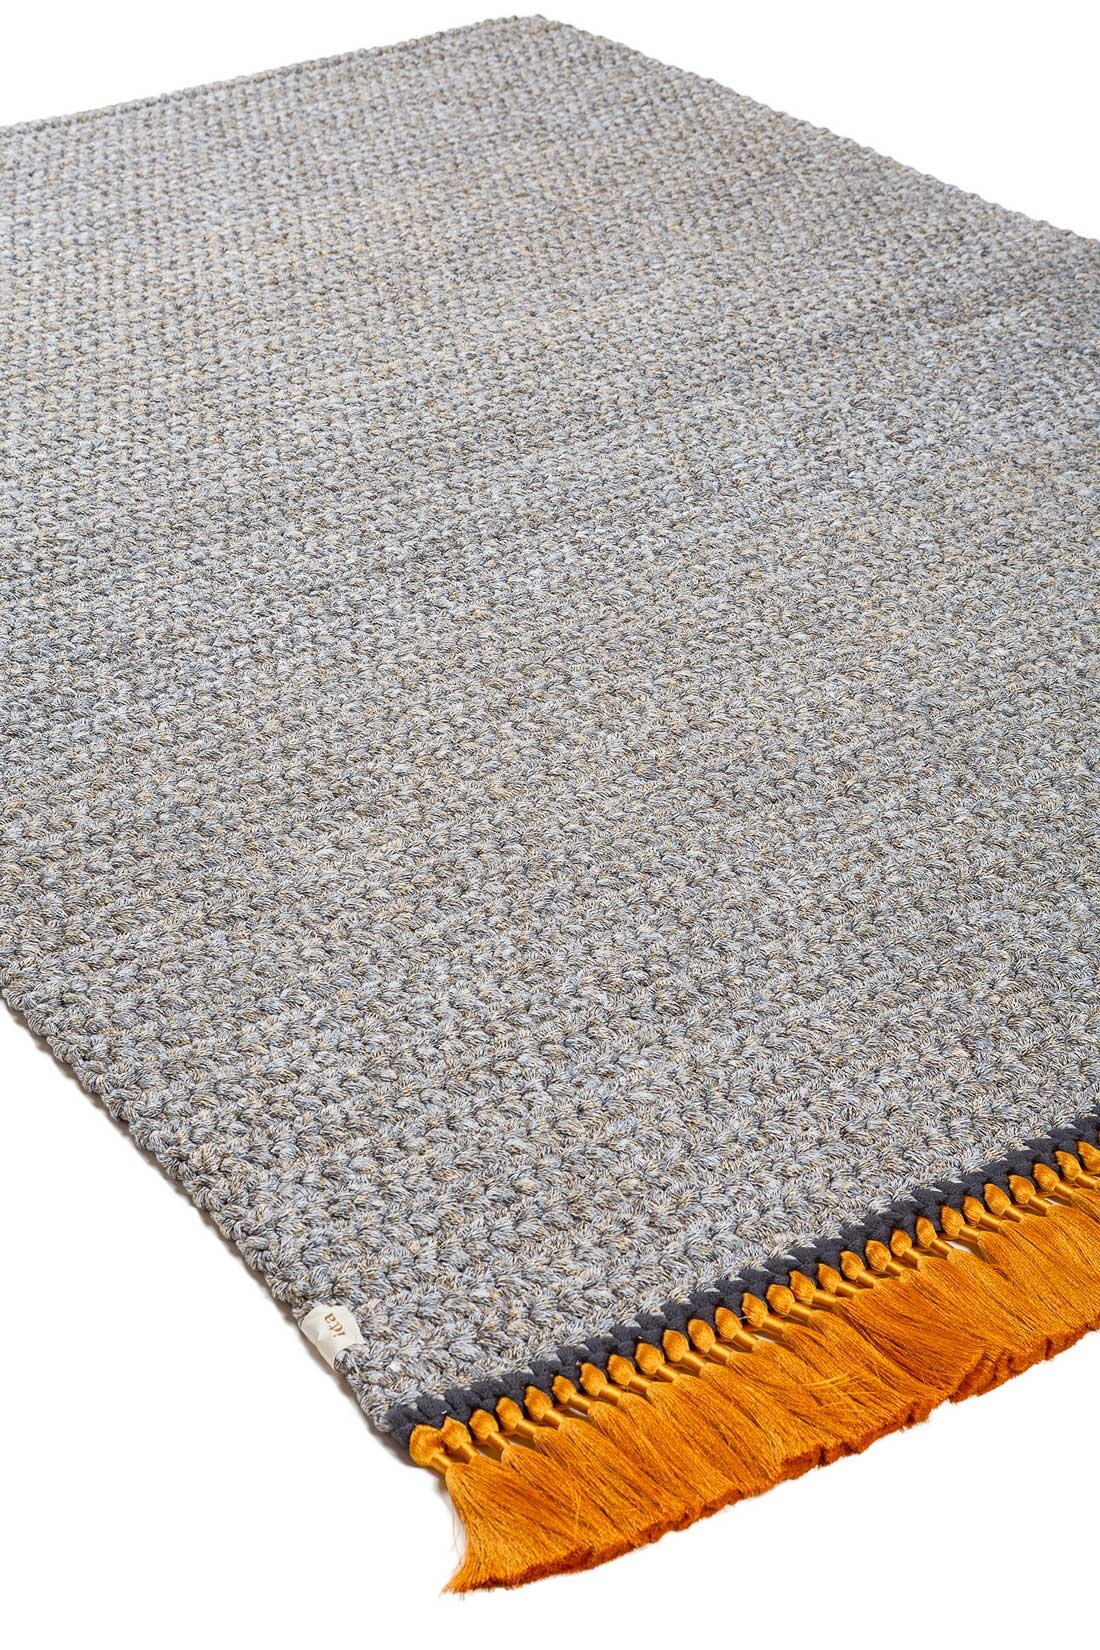 Hand-Crafted Handmade Crochet Thick Rug 170x240 cm in Grey Sand with Golden Tassels For Sale